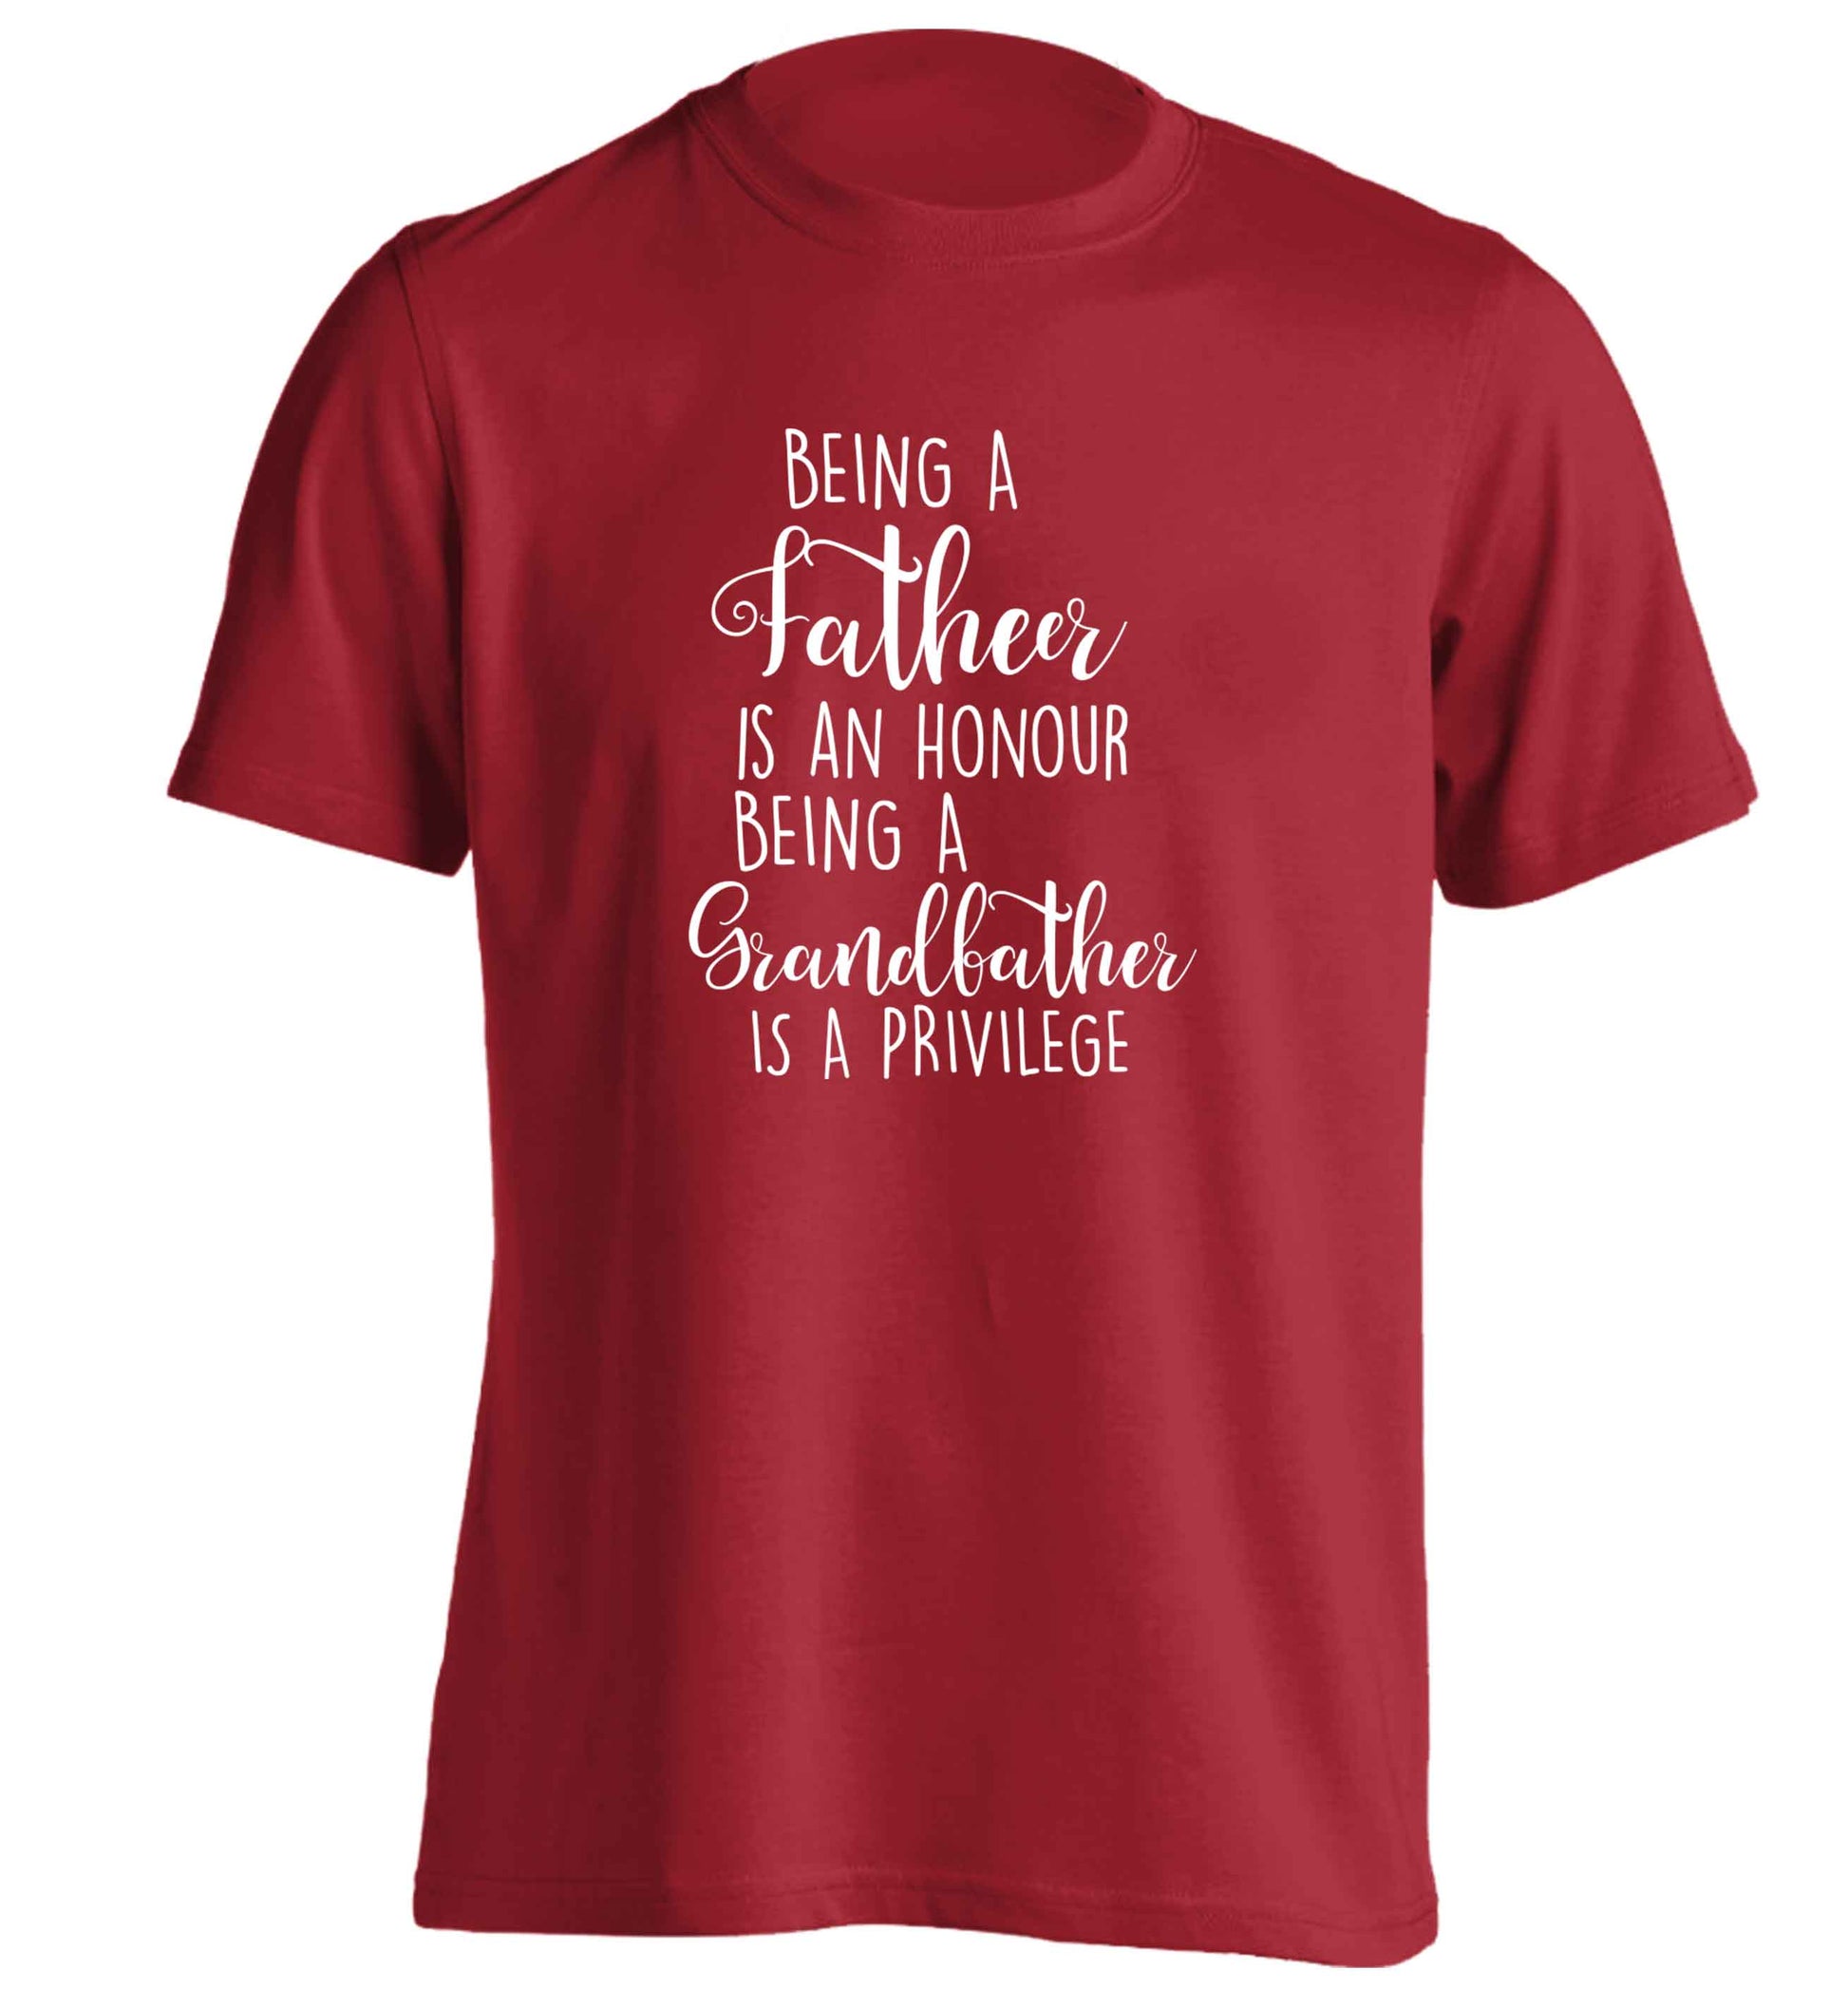 Being a father is an honour being a grandfather is a privilege adults unisex red Tshirt 2XL